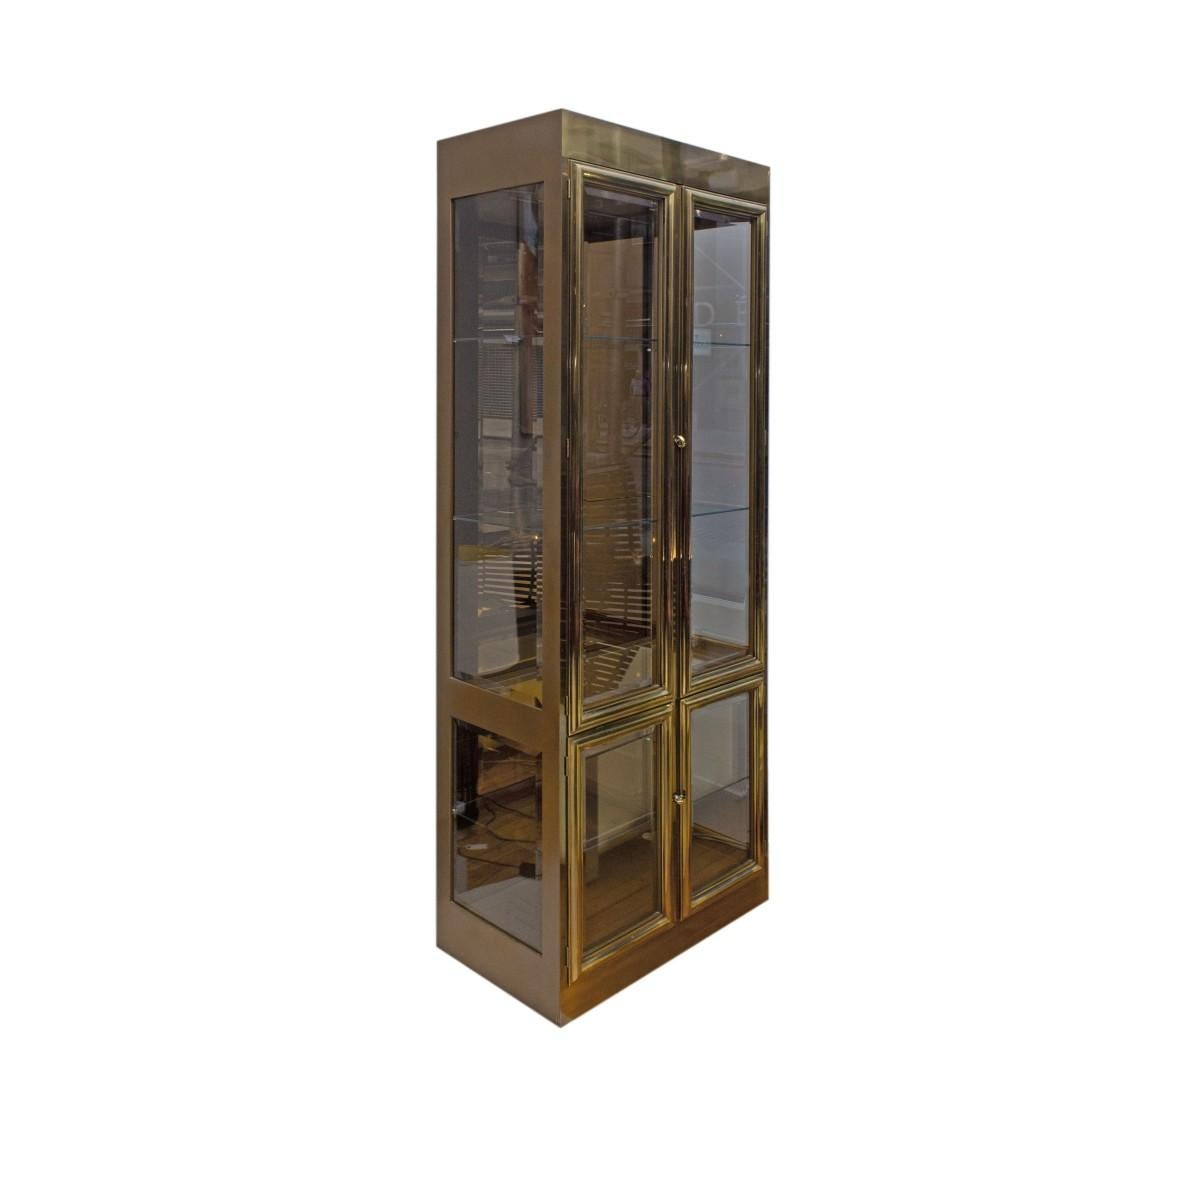 A midcentury brass and glass display cabinet / vitrine by Mastercraft, USA, circa 1960. Featuring two upper and two lower glass panel doors with glass shelves and interior lighting.